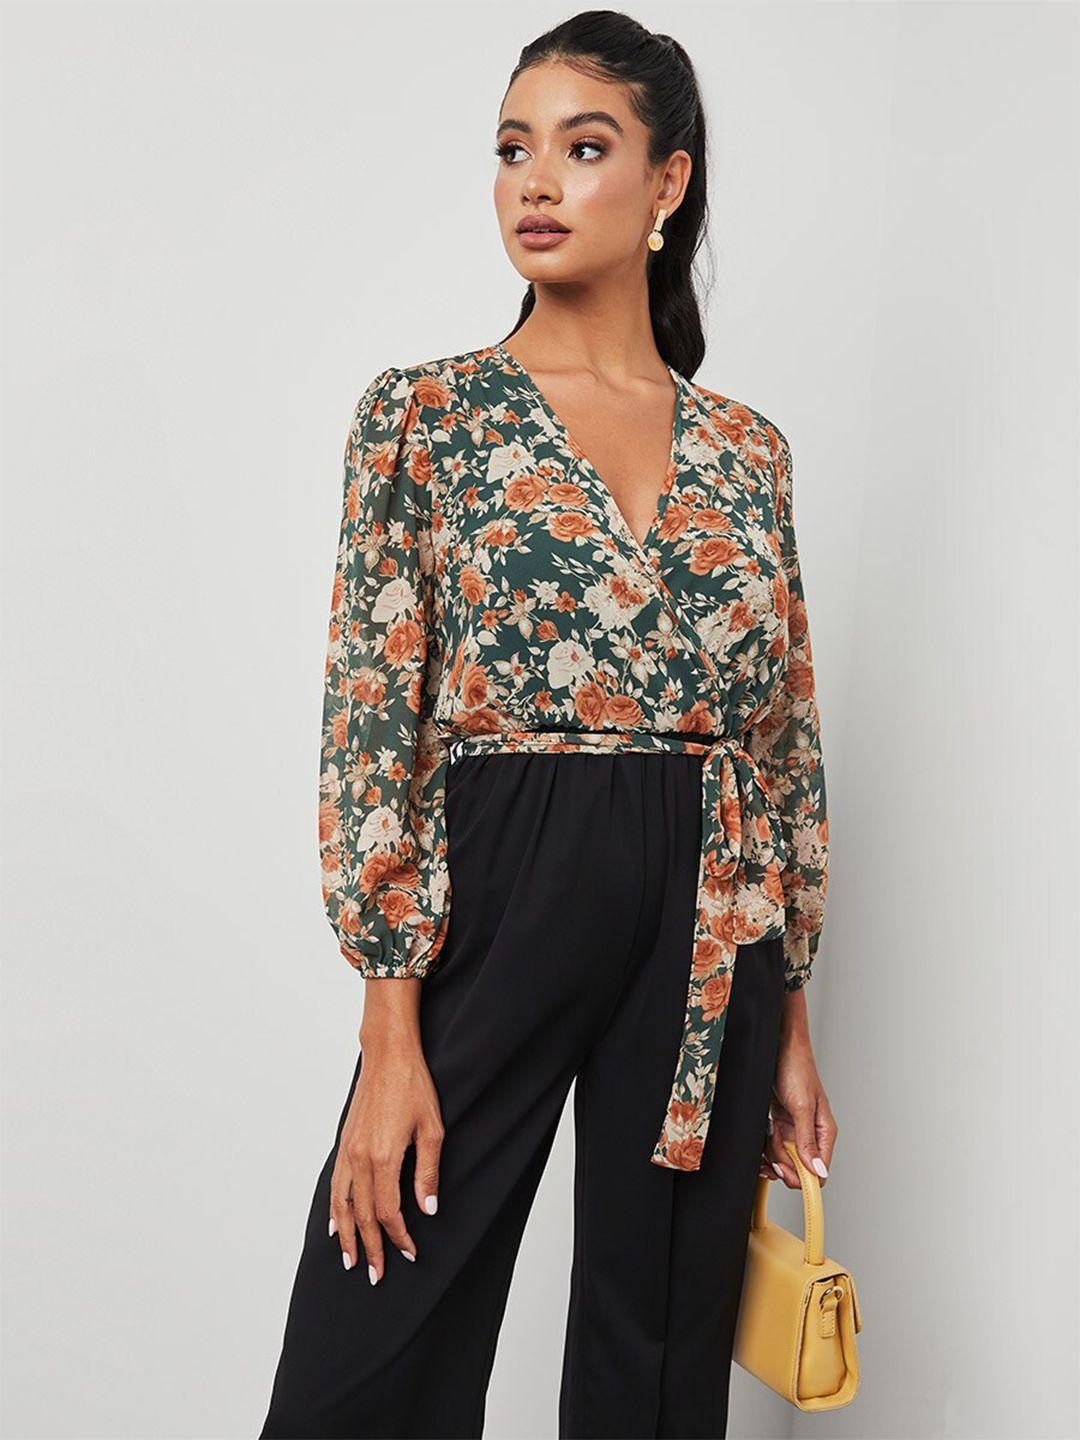 styli green & brown floral print long sleeves jumpsuit with tie belt